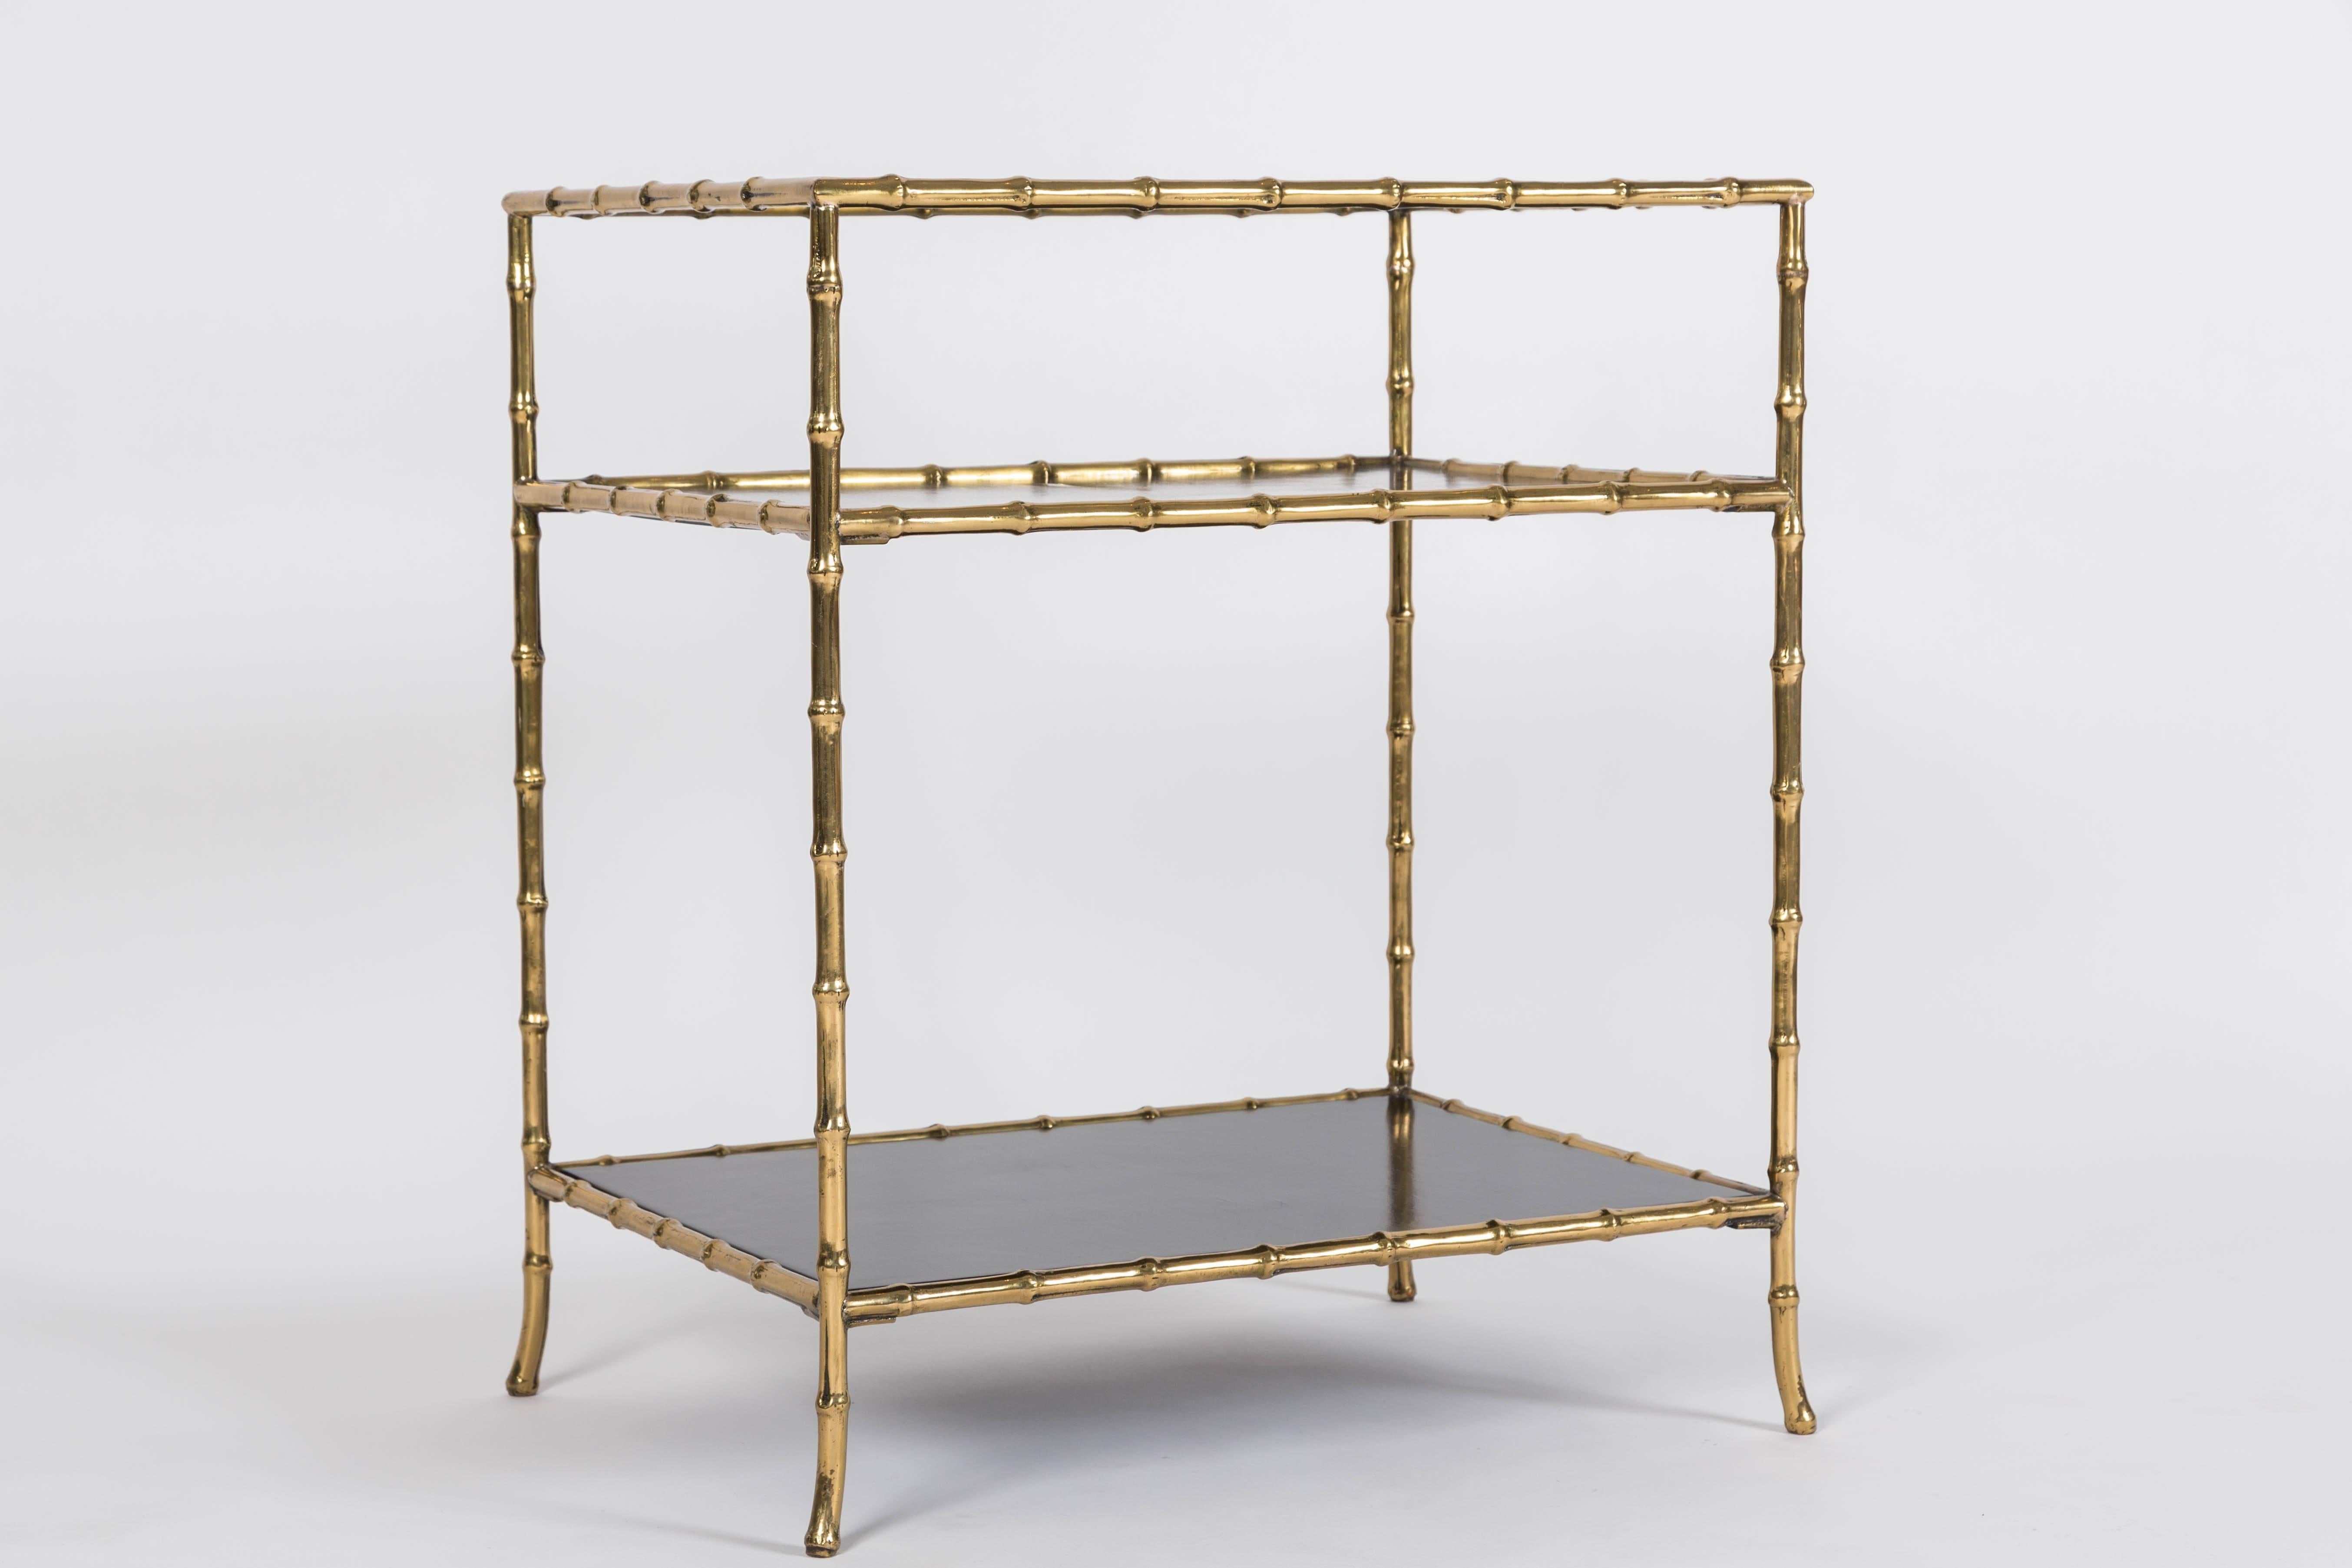 Polished brass faux bamboo frame with a gallery around the top shelve and polished black shelving inserts are the highlights of this lovely bar table. This table has a timeless design that complements multiple styles and decor.


 